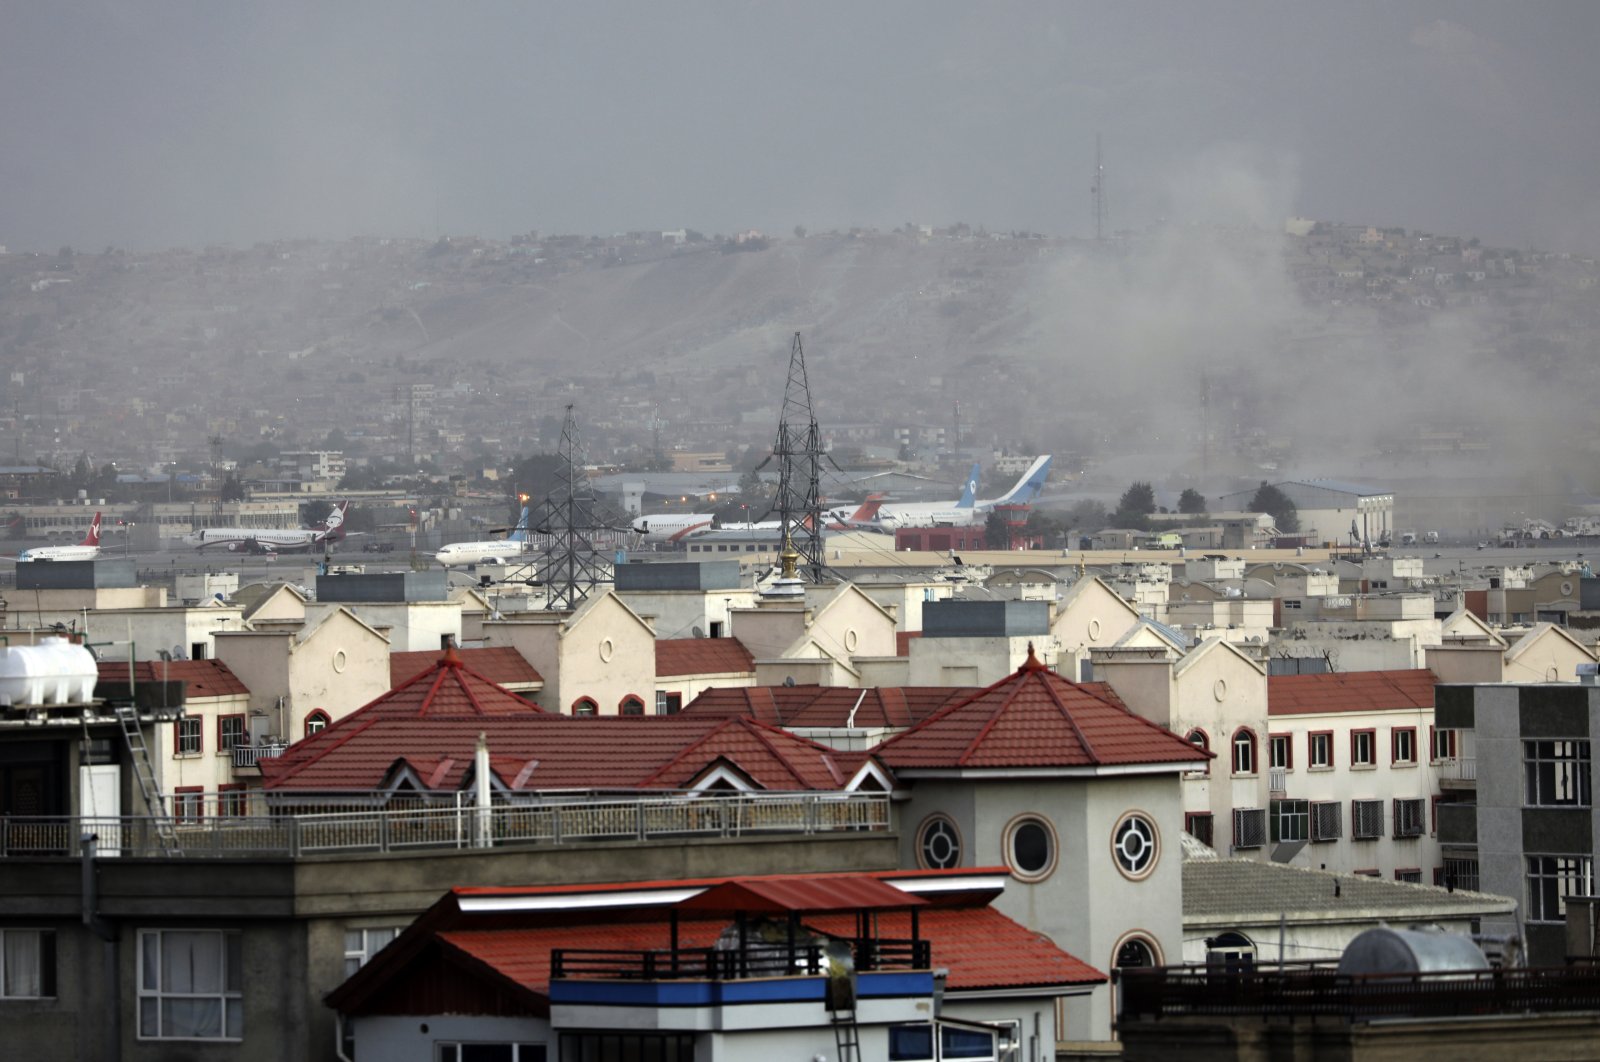 Smoke rises from a deadly explosion outside the airport in Kabul, Afghanistan, Aug. 26, 2021. (AP Photo)